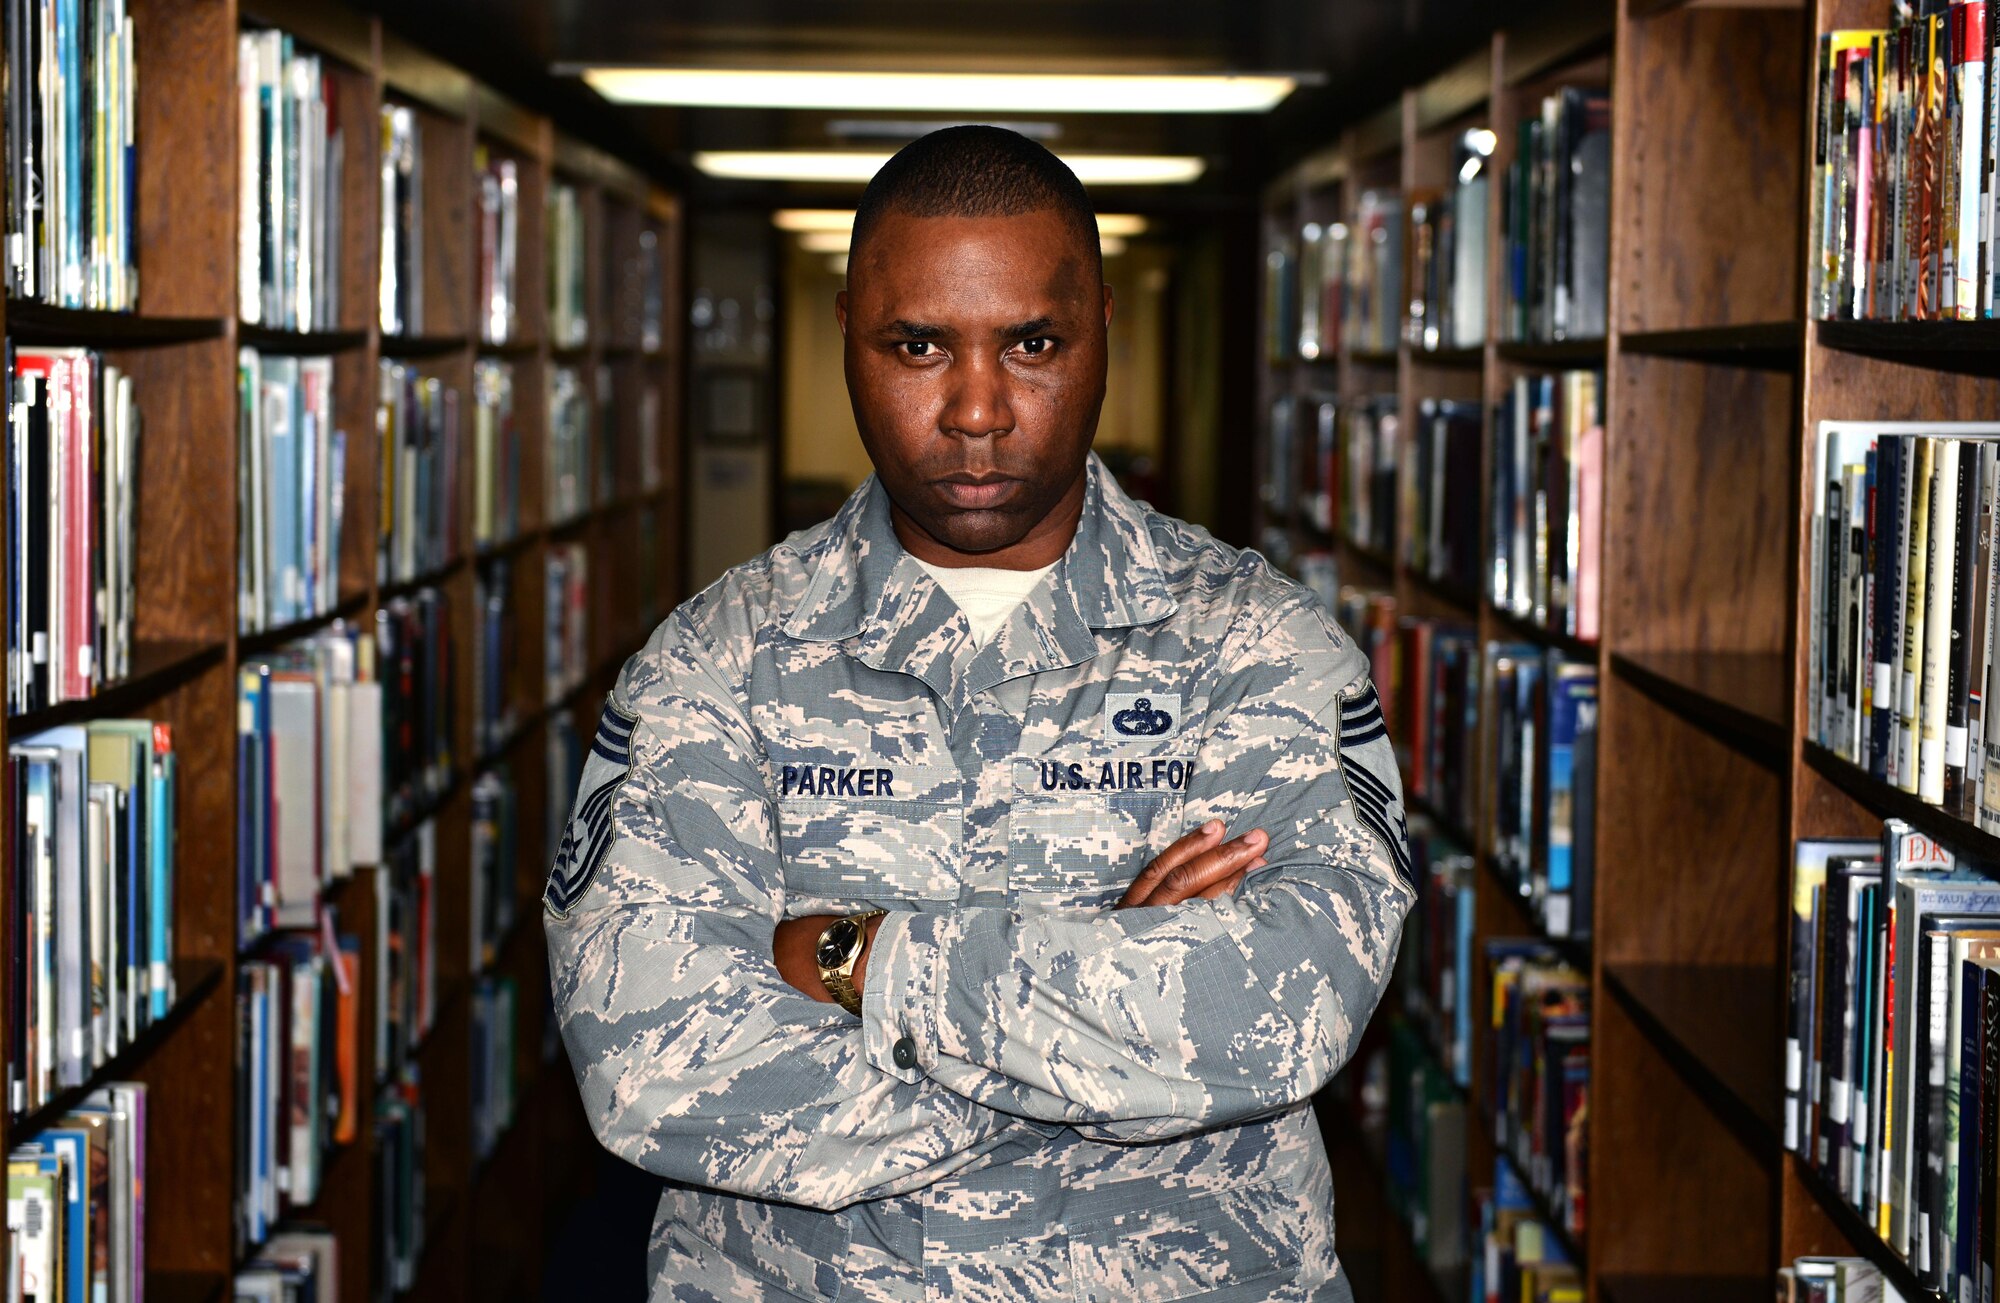 Chief Master Sgt. Marvin Parker, 36th Mission Support Group superintendent, holds a doctorate in business administration, summa cum laude. Since completing his transportation management Community College of the Air Force degree in 2003, Parker hasn’t stop pursuing higher education and hopes to motivate other Airmen to follow his example. (U.S. Air Force photo by Senior Airman Alexander W. Riedel/Released)